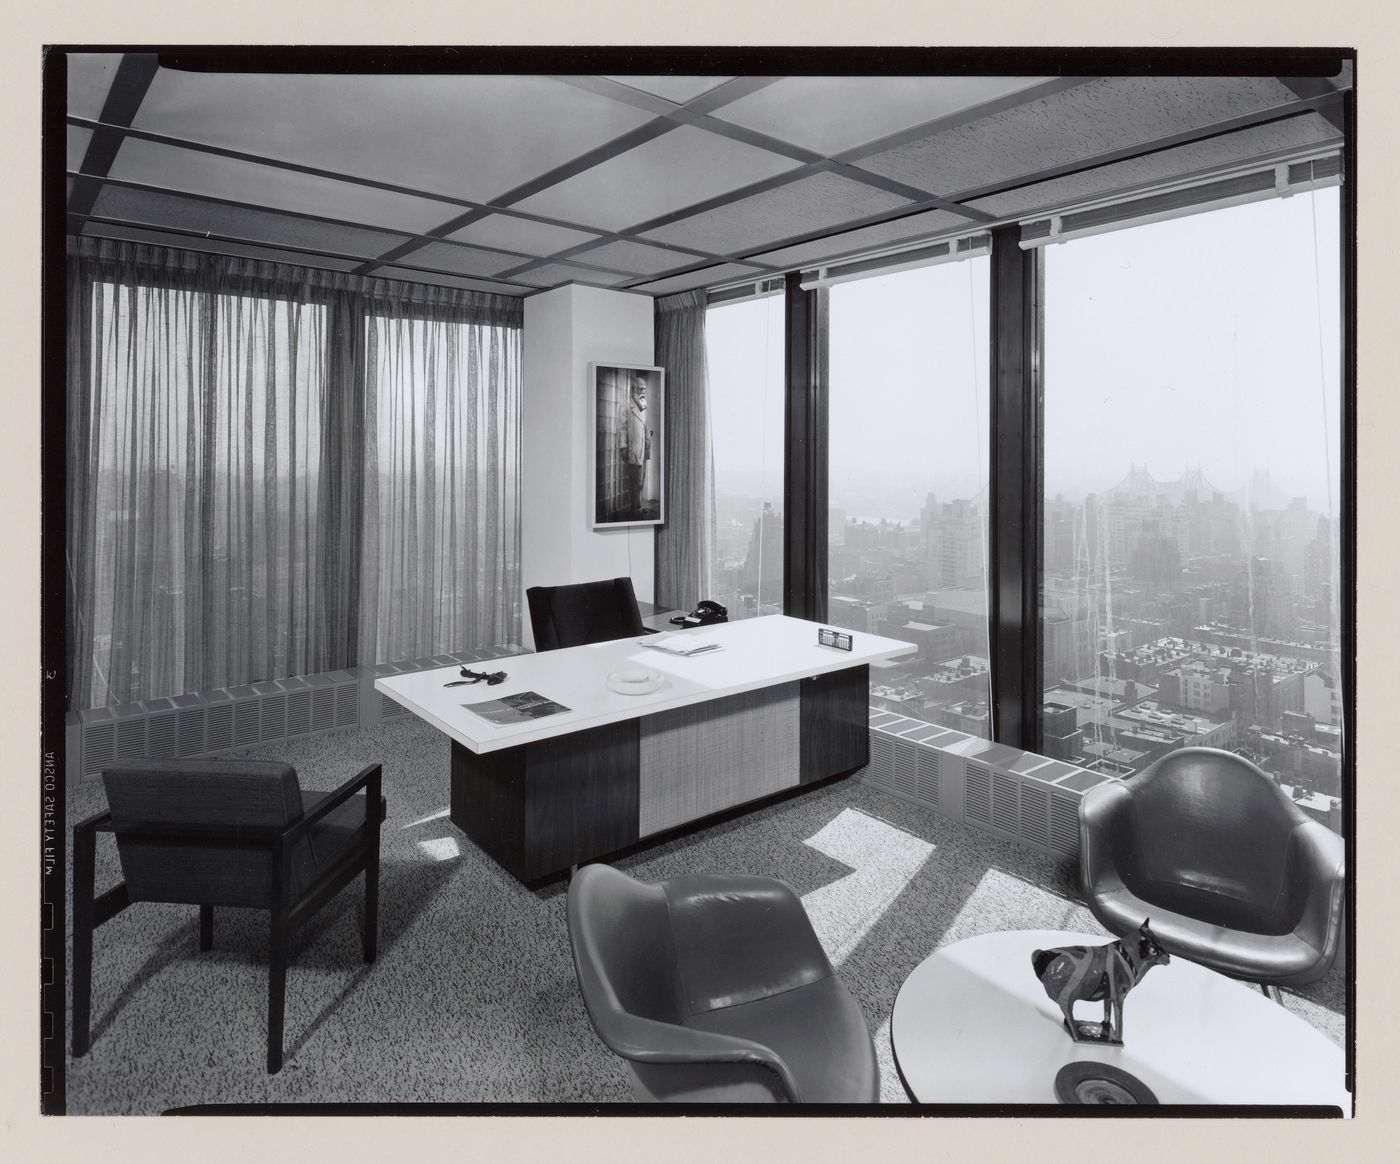 Interior view of a furnished office in the Seagram Building showing the recessed light fixtures designed by Richard Kelly, New York City